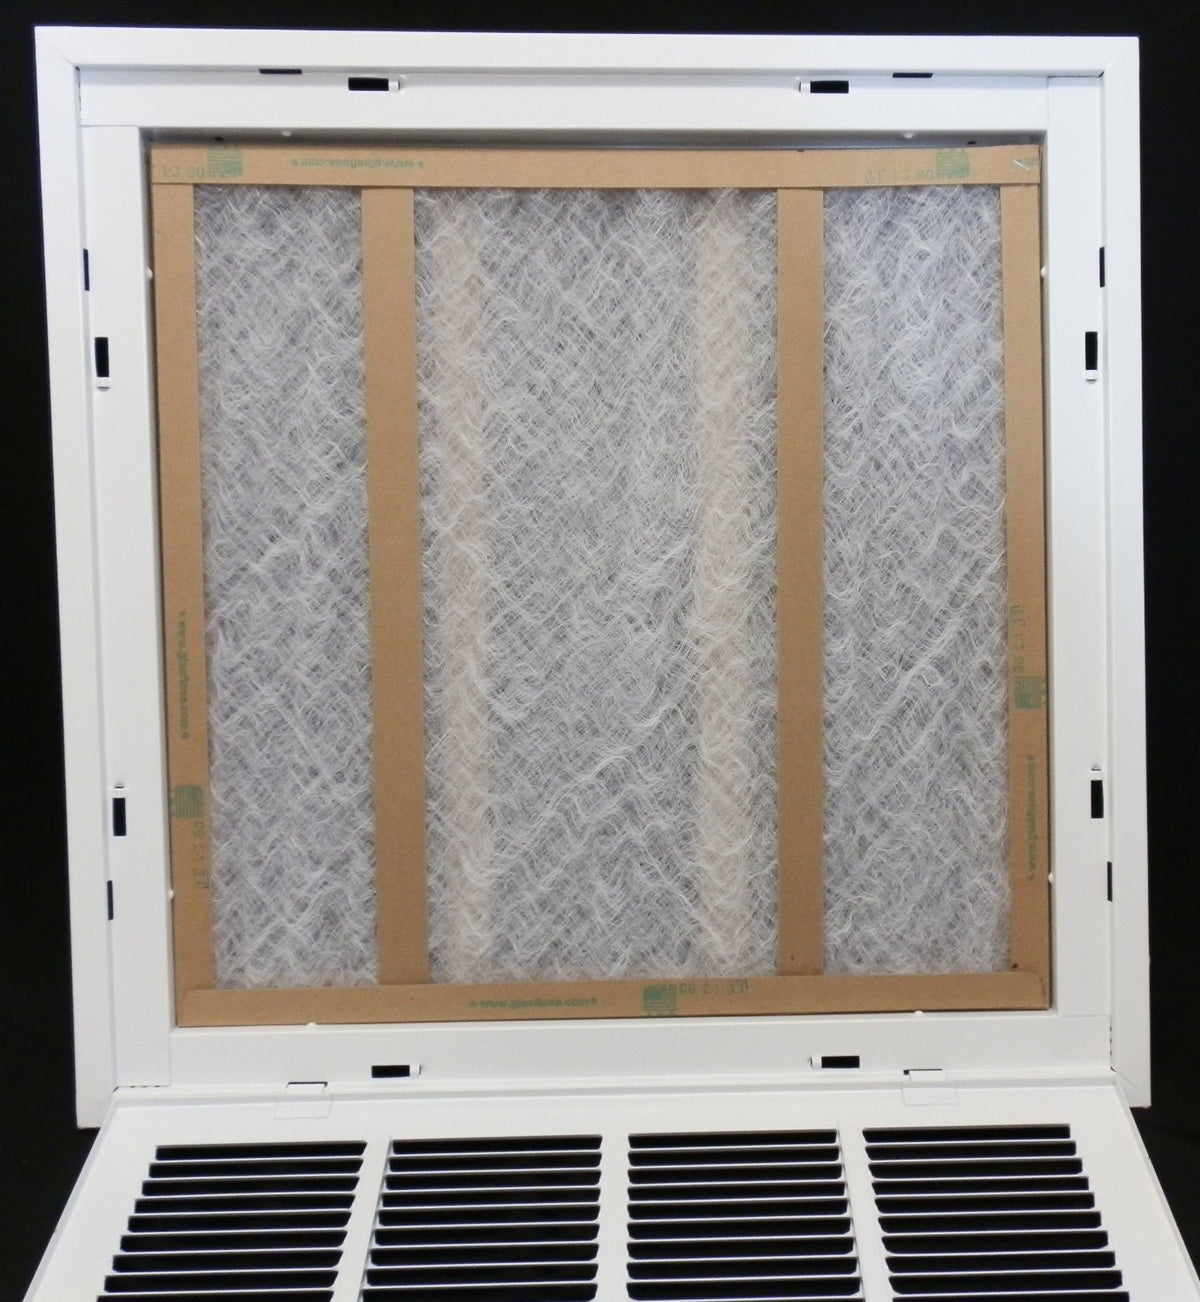 20&quot; X 30&quot; Steel Return Air Filter Grille for 1&quot; Filter - Removable Frame - [Outer Dimensions: 22 5/8&quot; X 32 5/8&quot;]